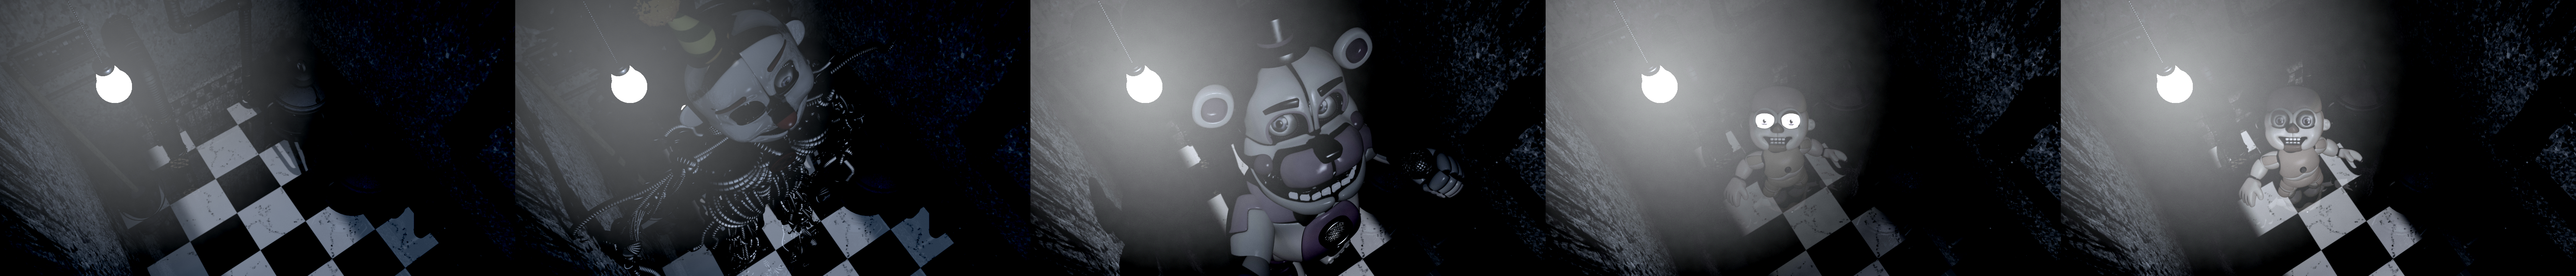 Five Nights at Freddy's: Sister Location - CAM 03